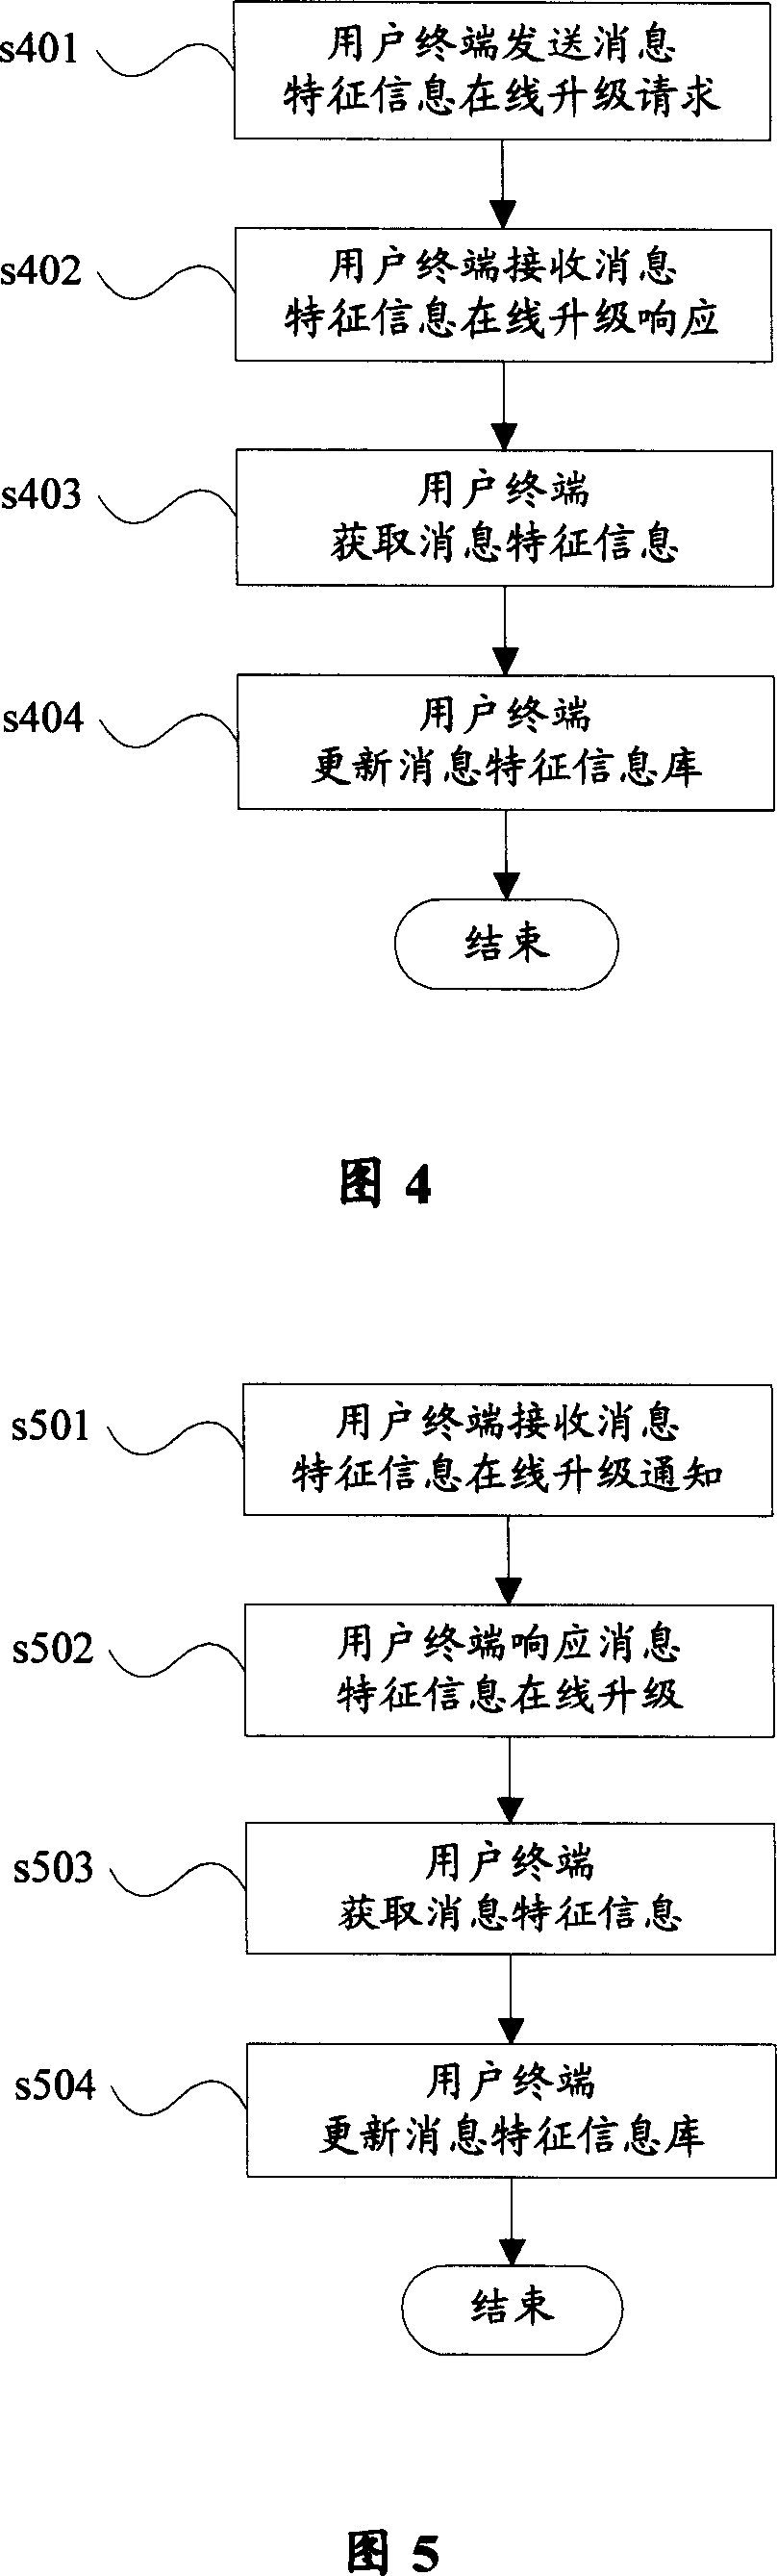 Message monitoring method and device